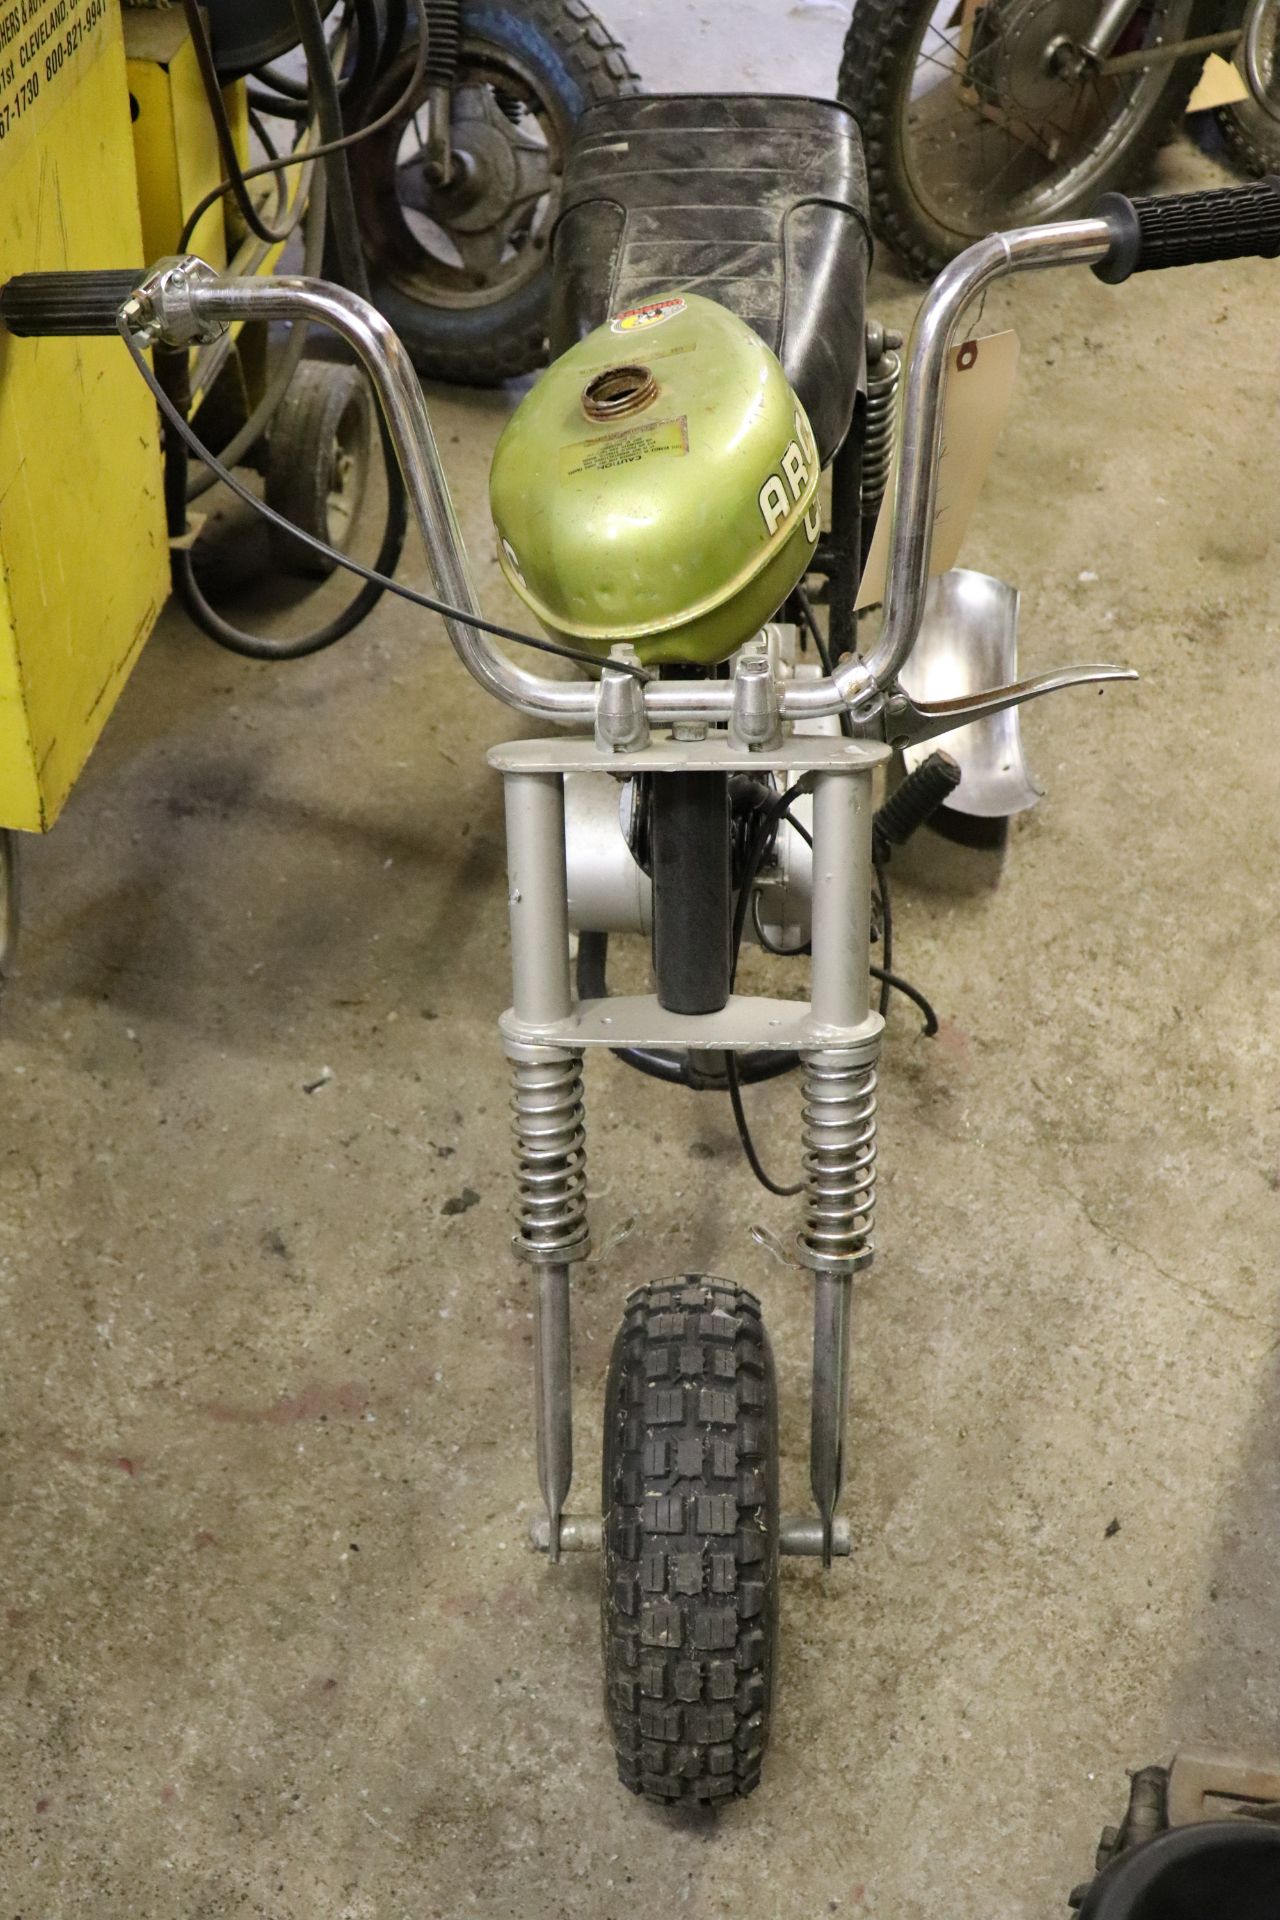 1971 Arctic Cat Whisker, model 2328-001 MINI BIKES MARKED AS PARTS BIKES, NOT OPERATIONAL, CONDITION - Image 4 of 5